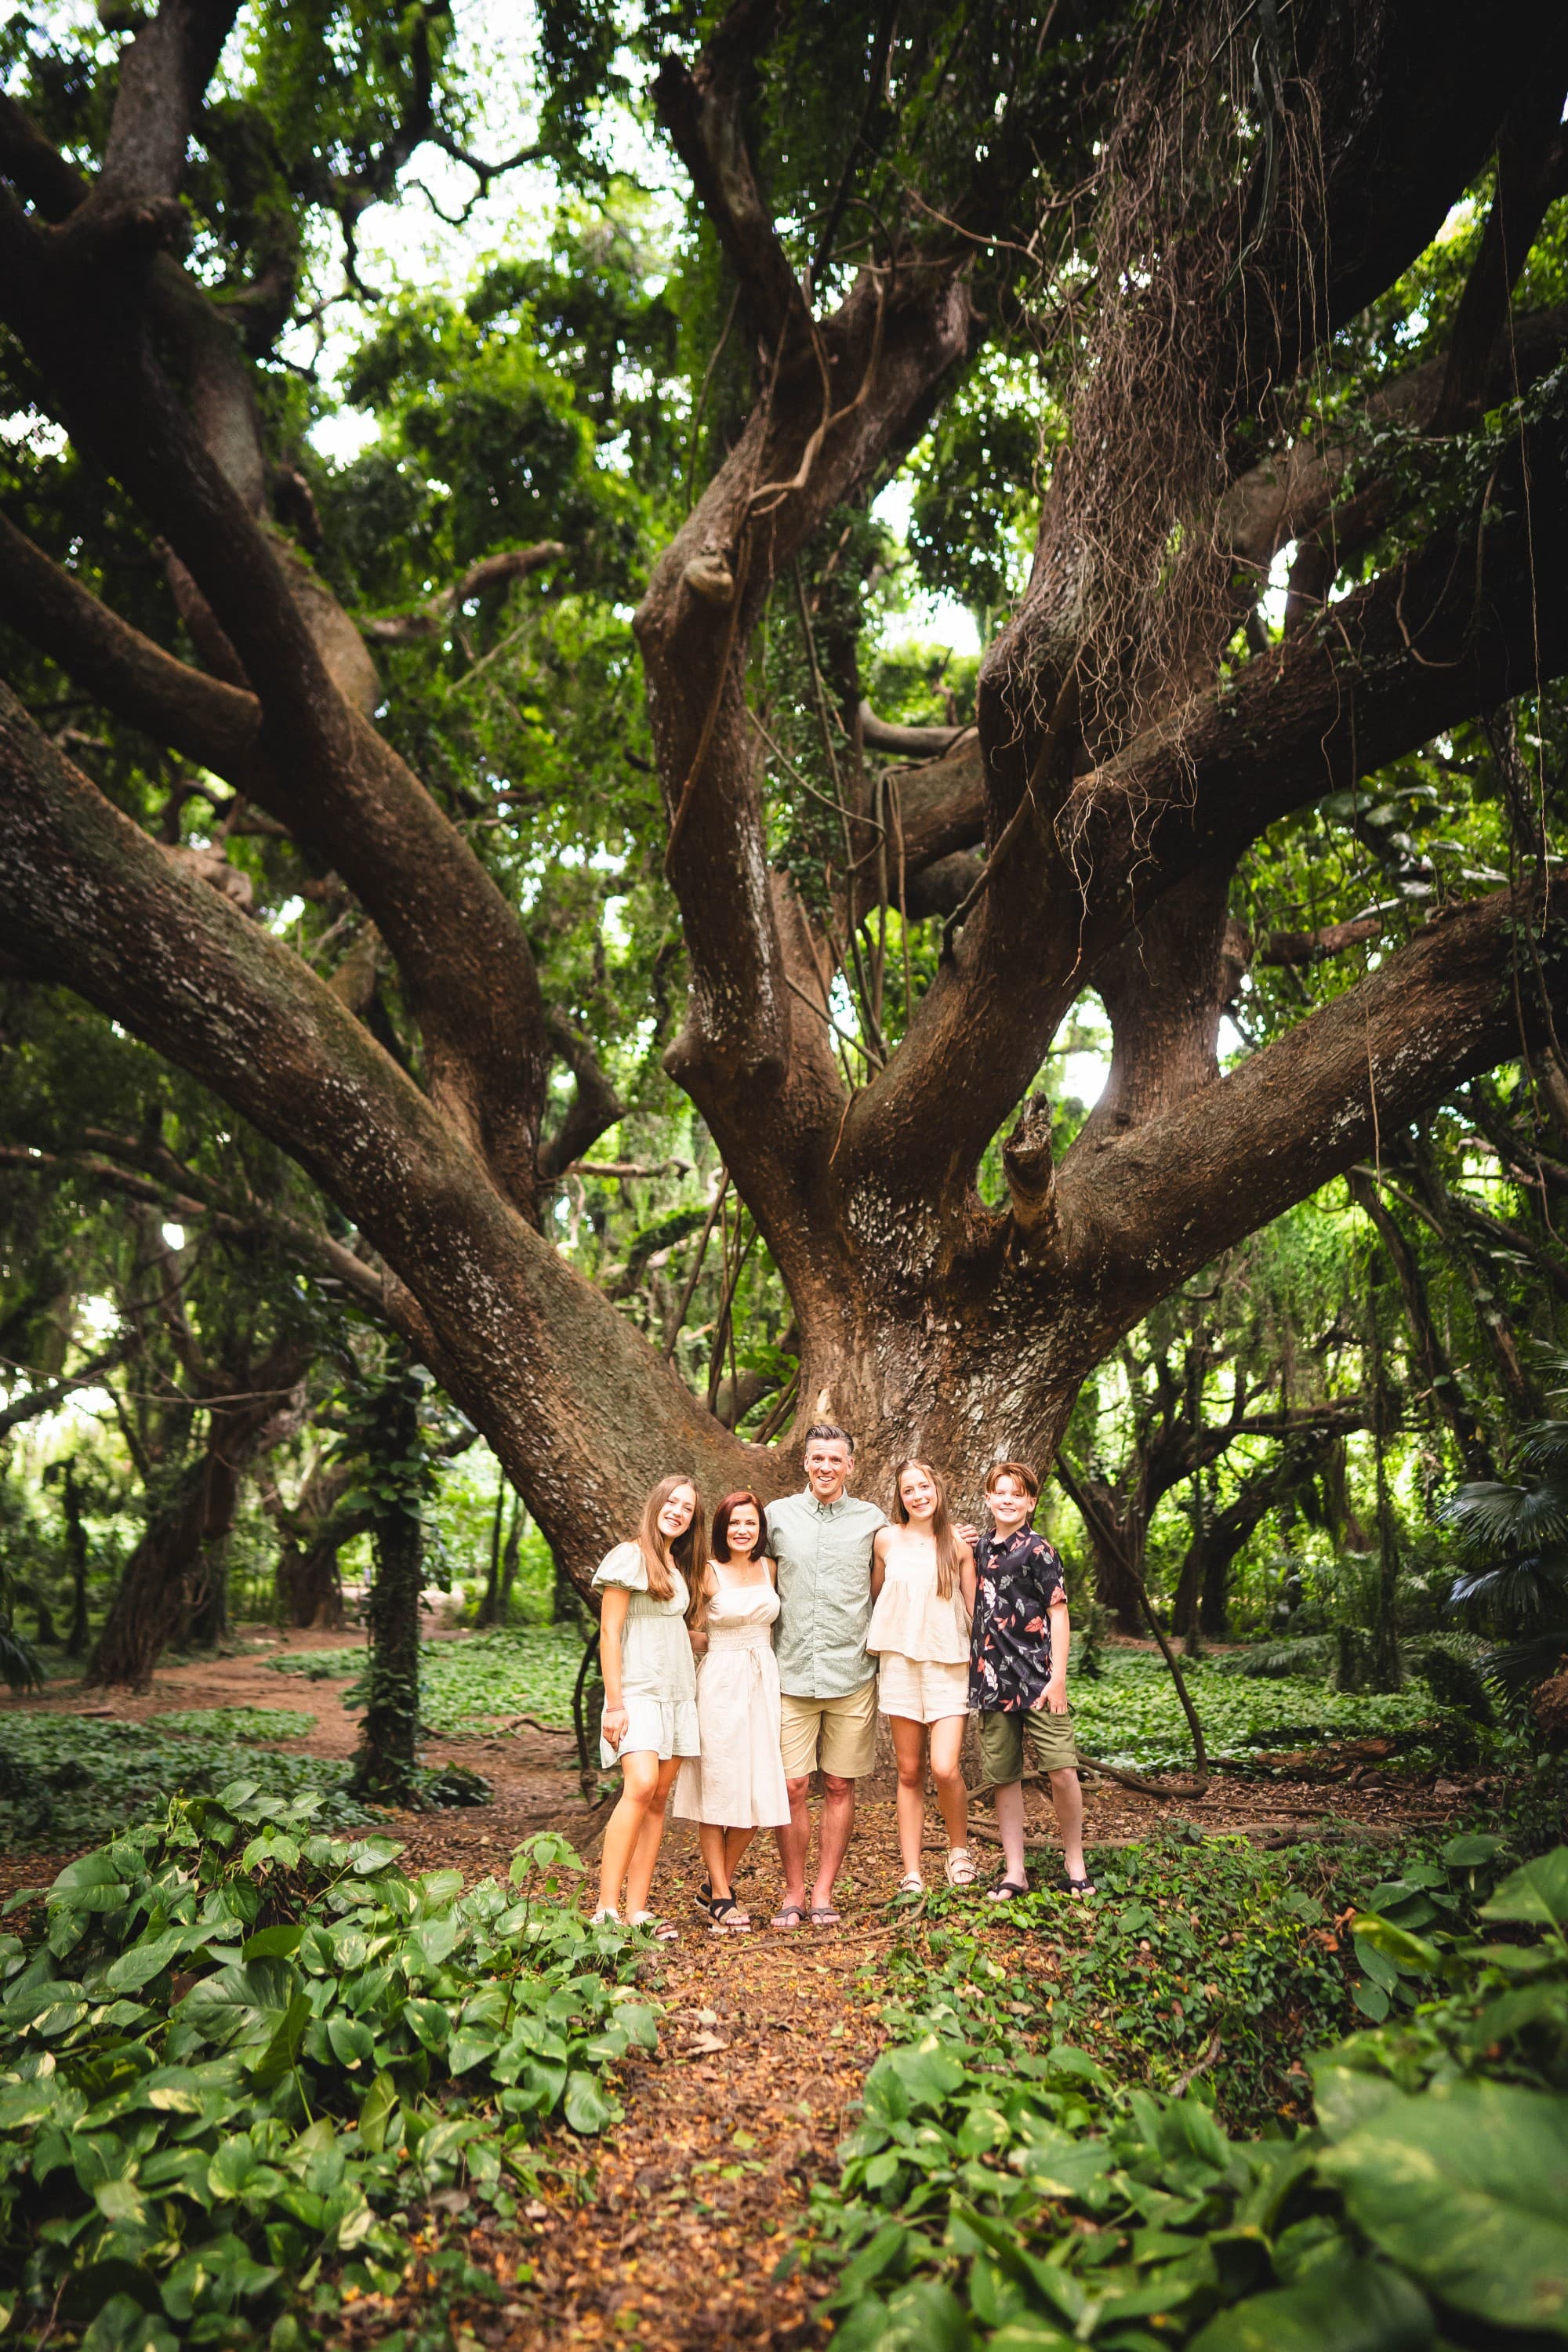 Memorable Family Photo Session at Honolua Forest and Ironwoods Beach, Kapalua Maui: The Buell Family Adventure